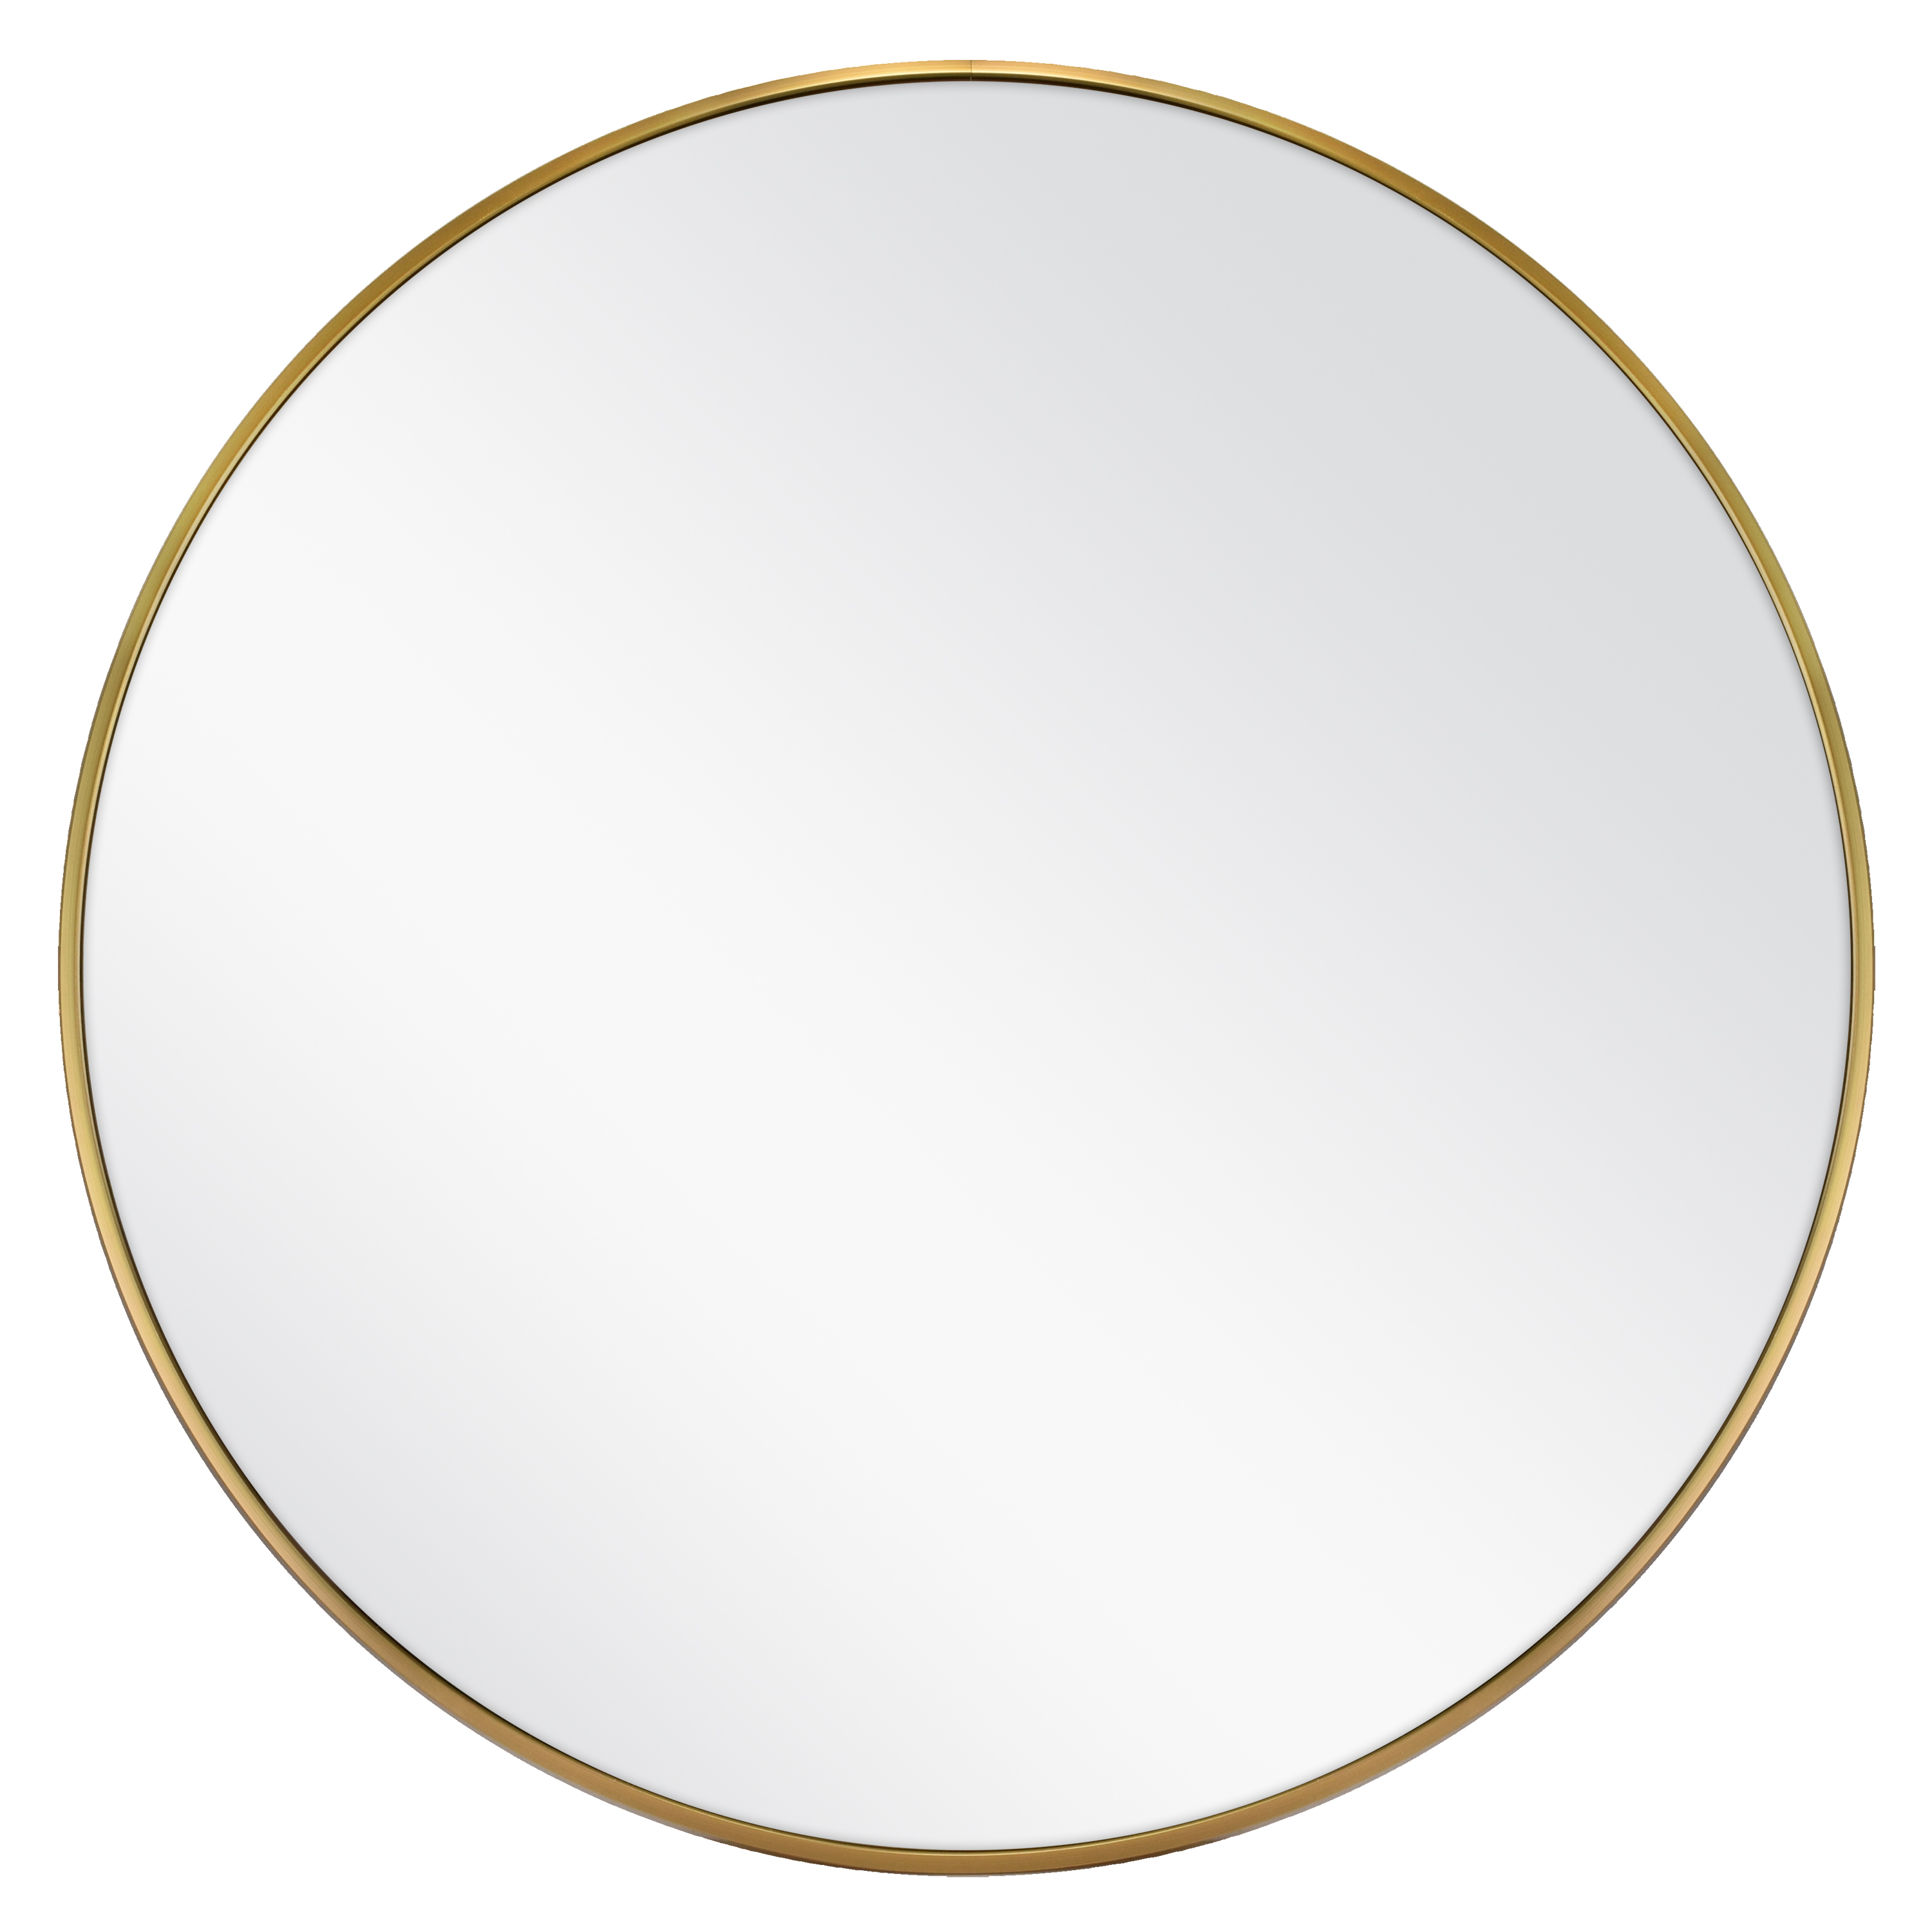 Better Homes & Gardens 28" x 28" Gold Glam, Modern and Bohemian Vanity Mirror - image 1 of 6